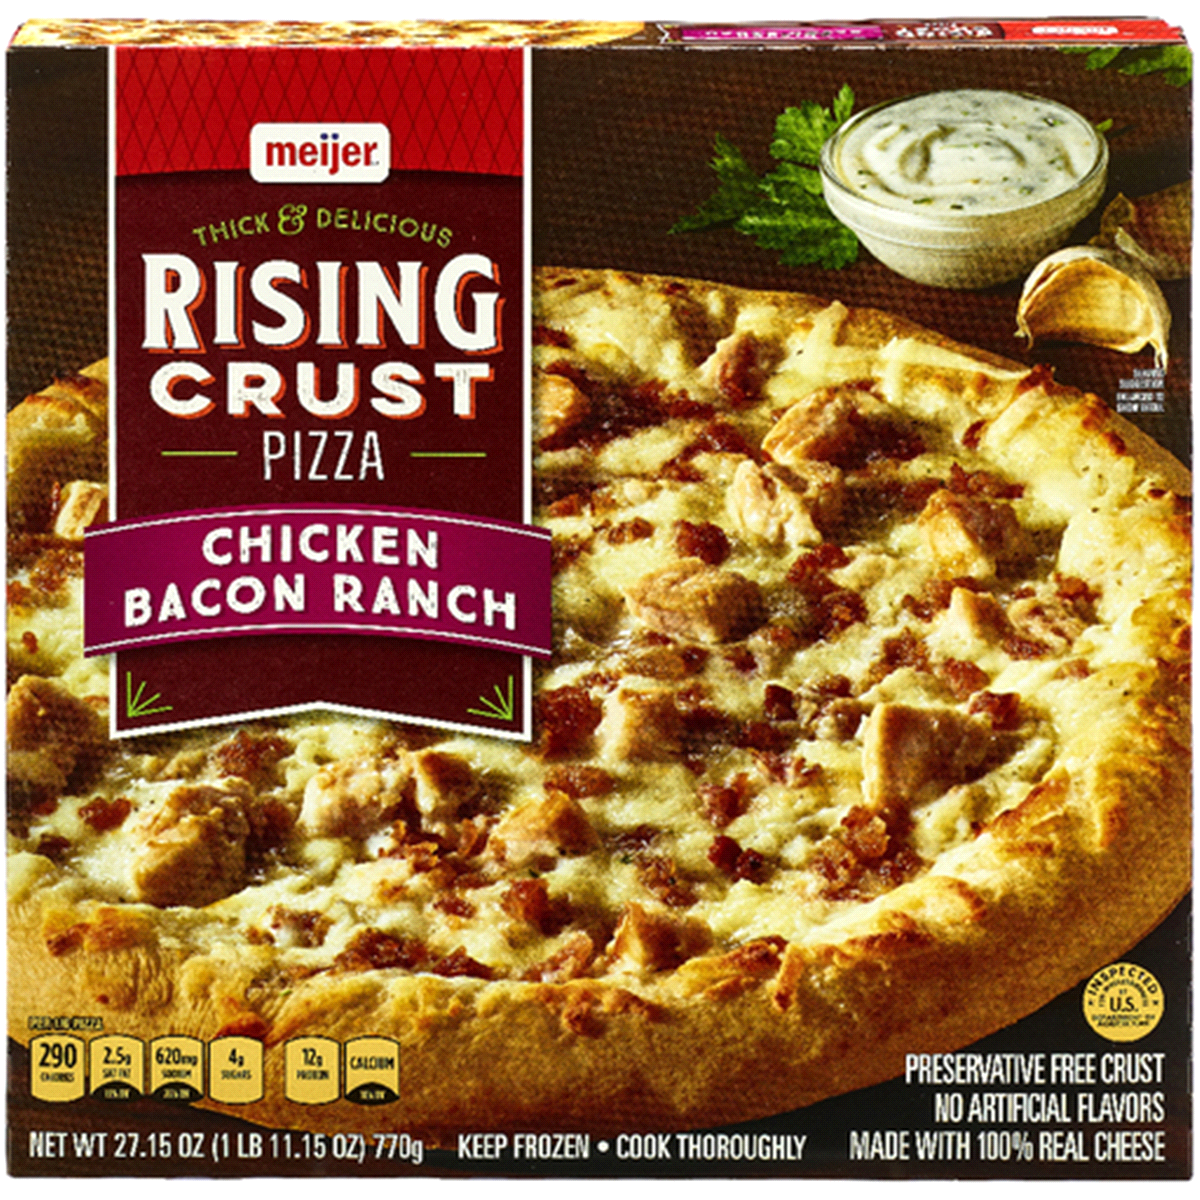 slide 1 of 1, Meijer Thick & Delicious Rising Crust Pizza, Chicken Bacon Ranch, 27.15 oz